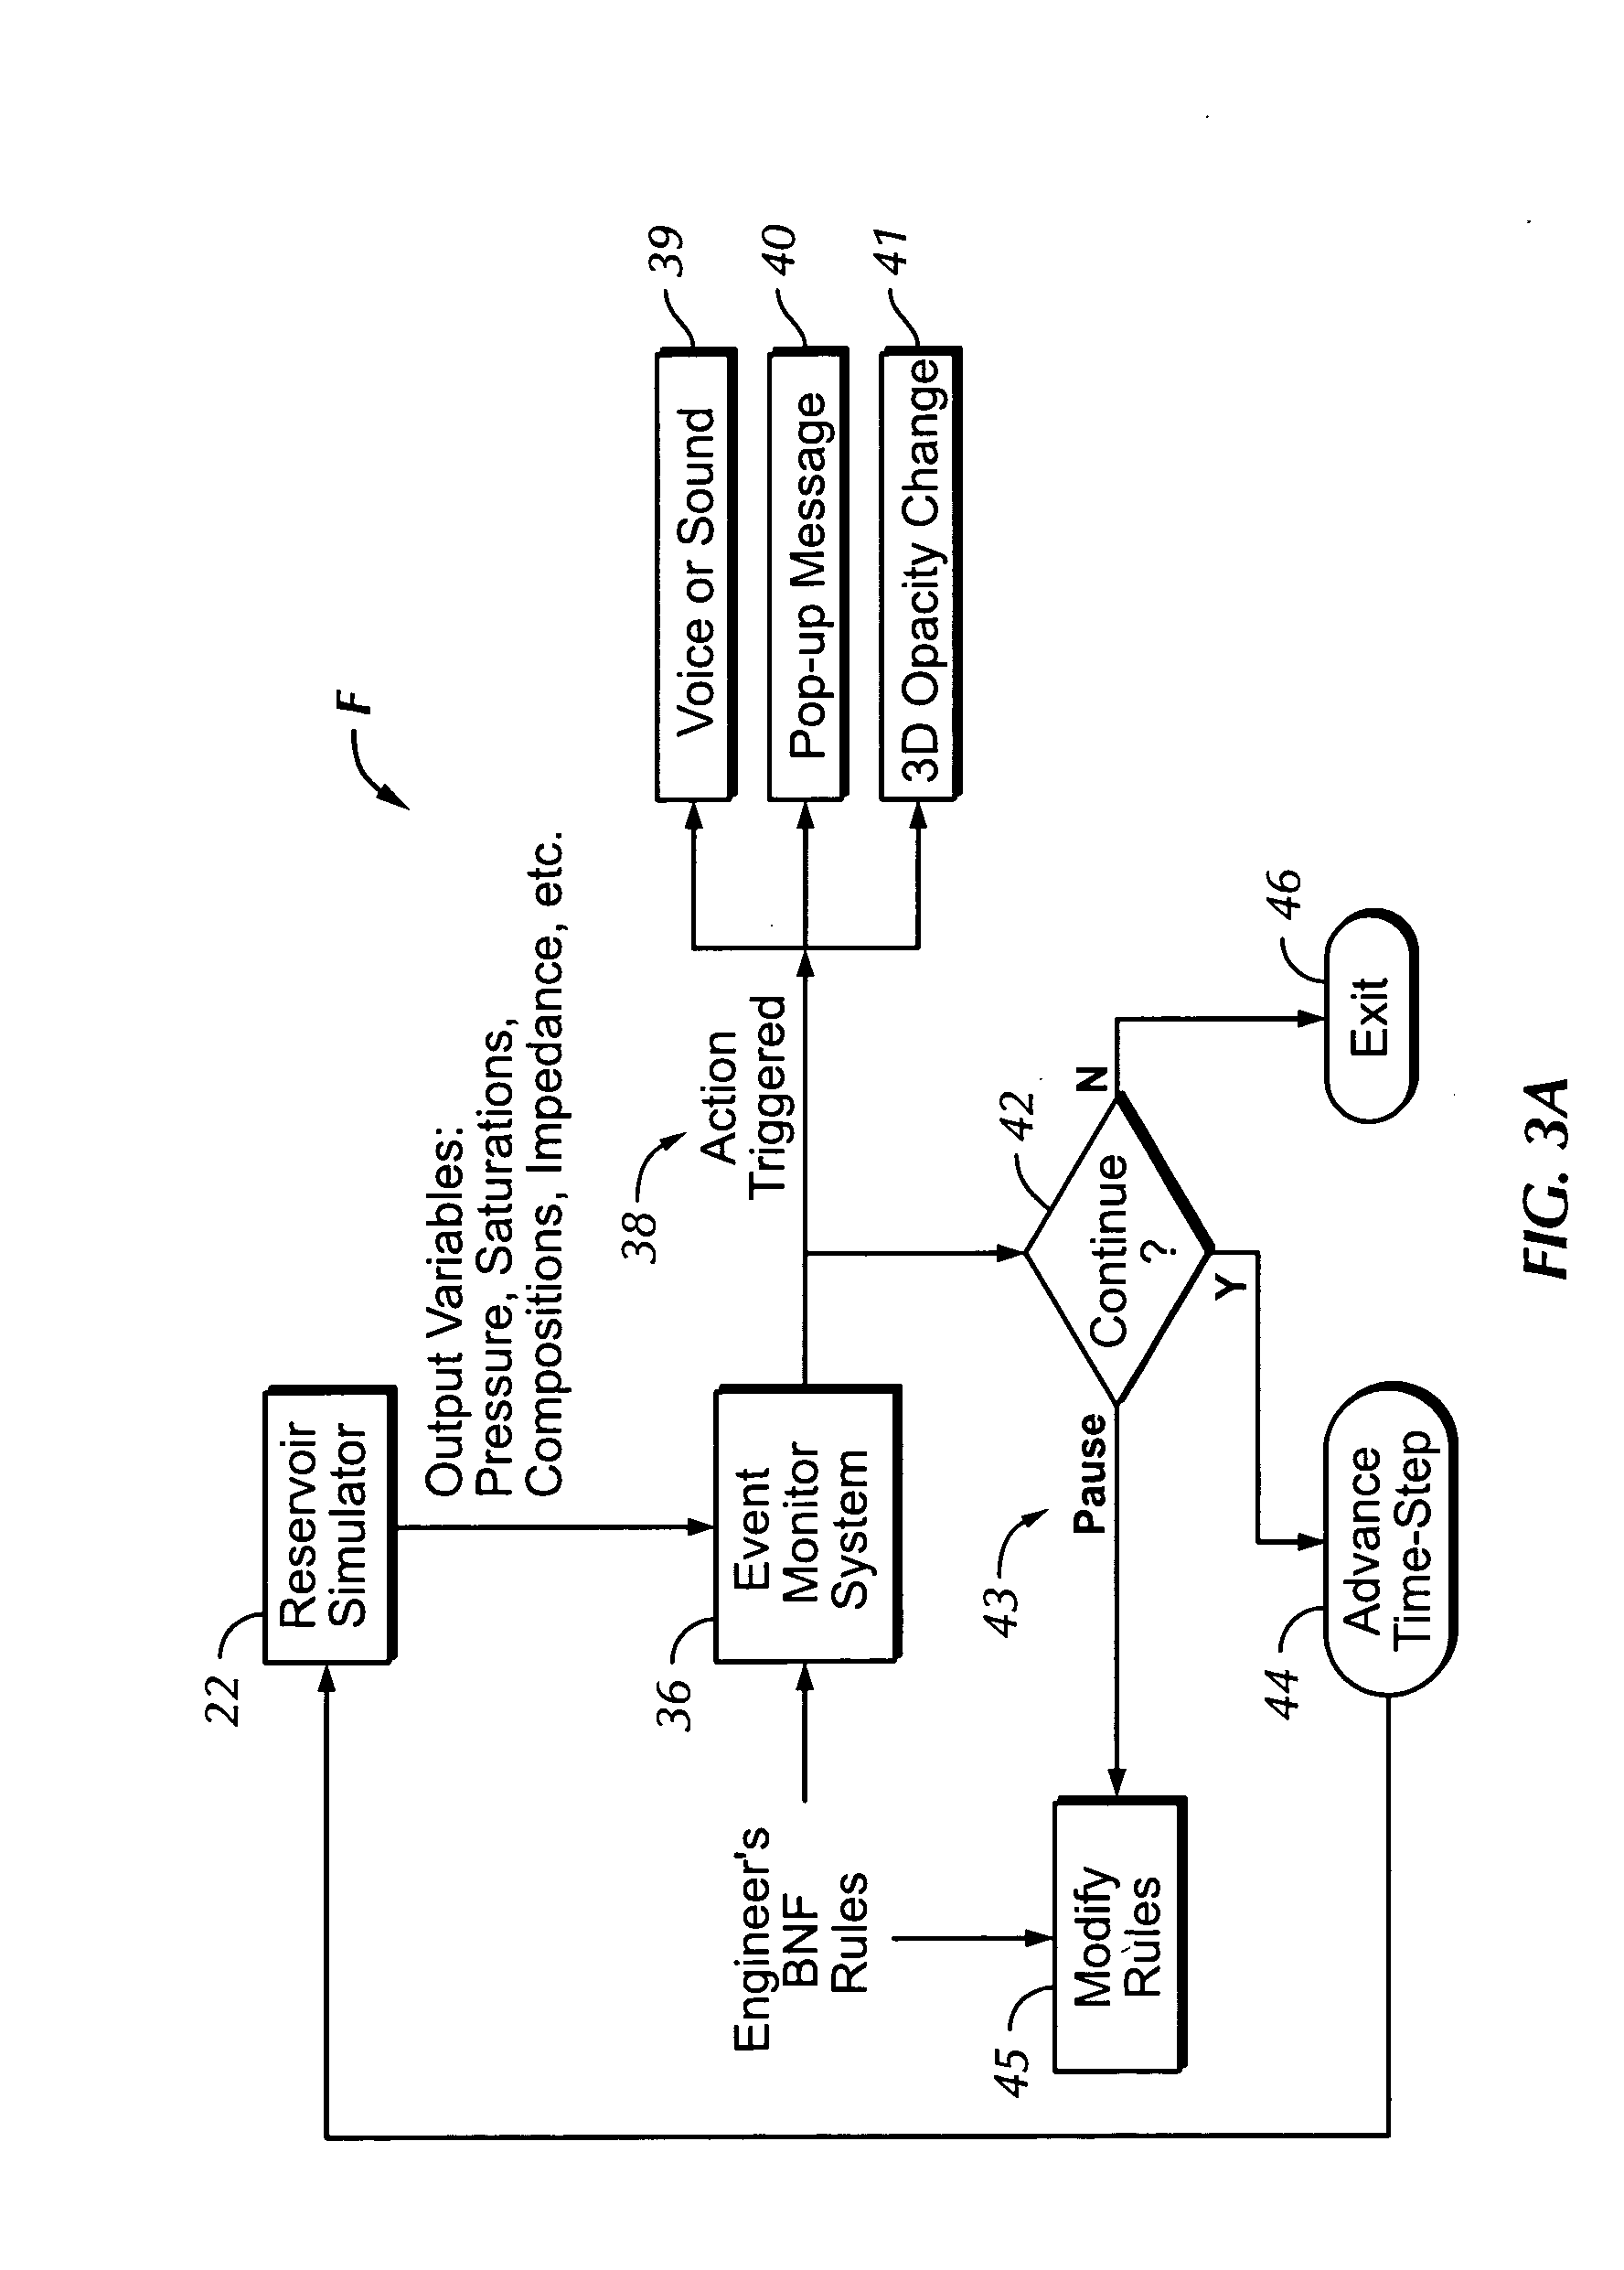 Automated event monitoring system for online reservoir simulation